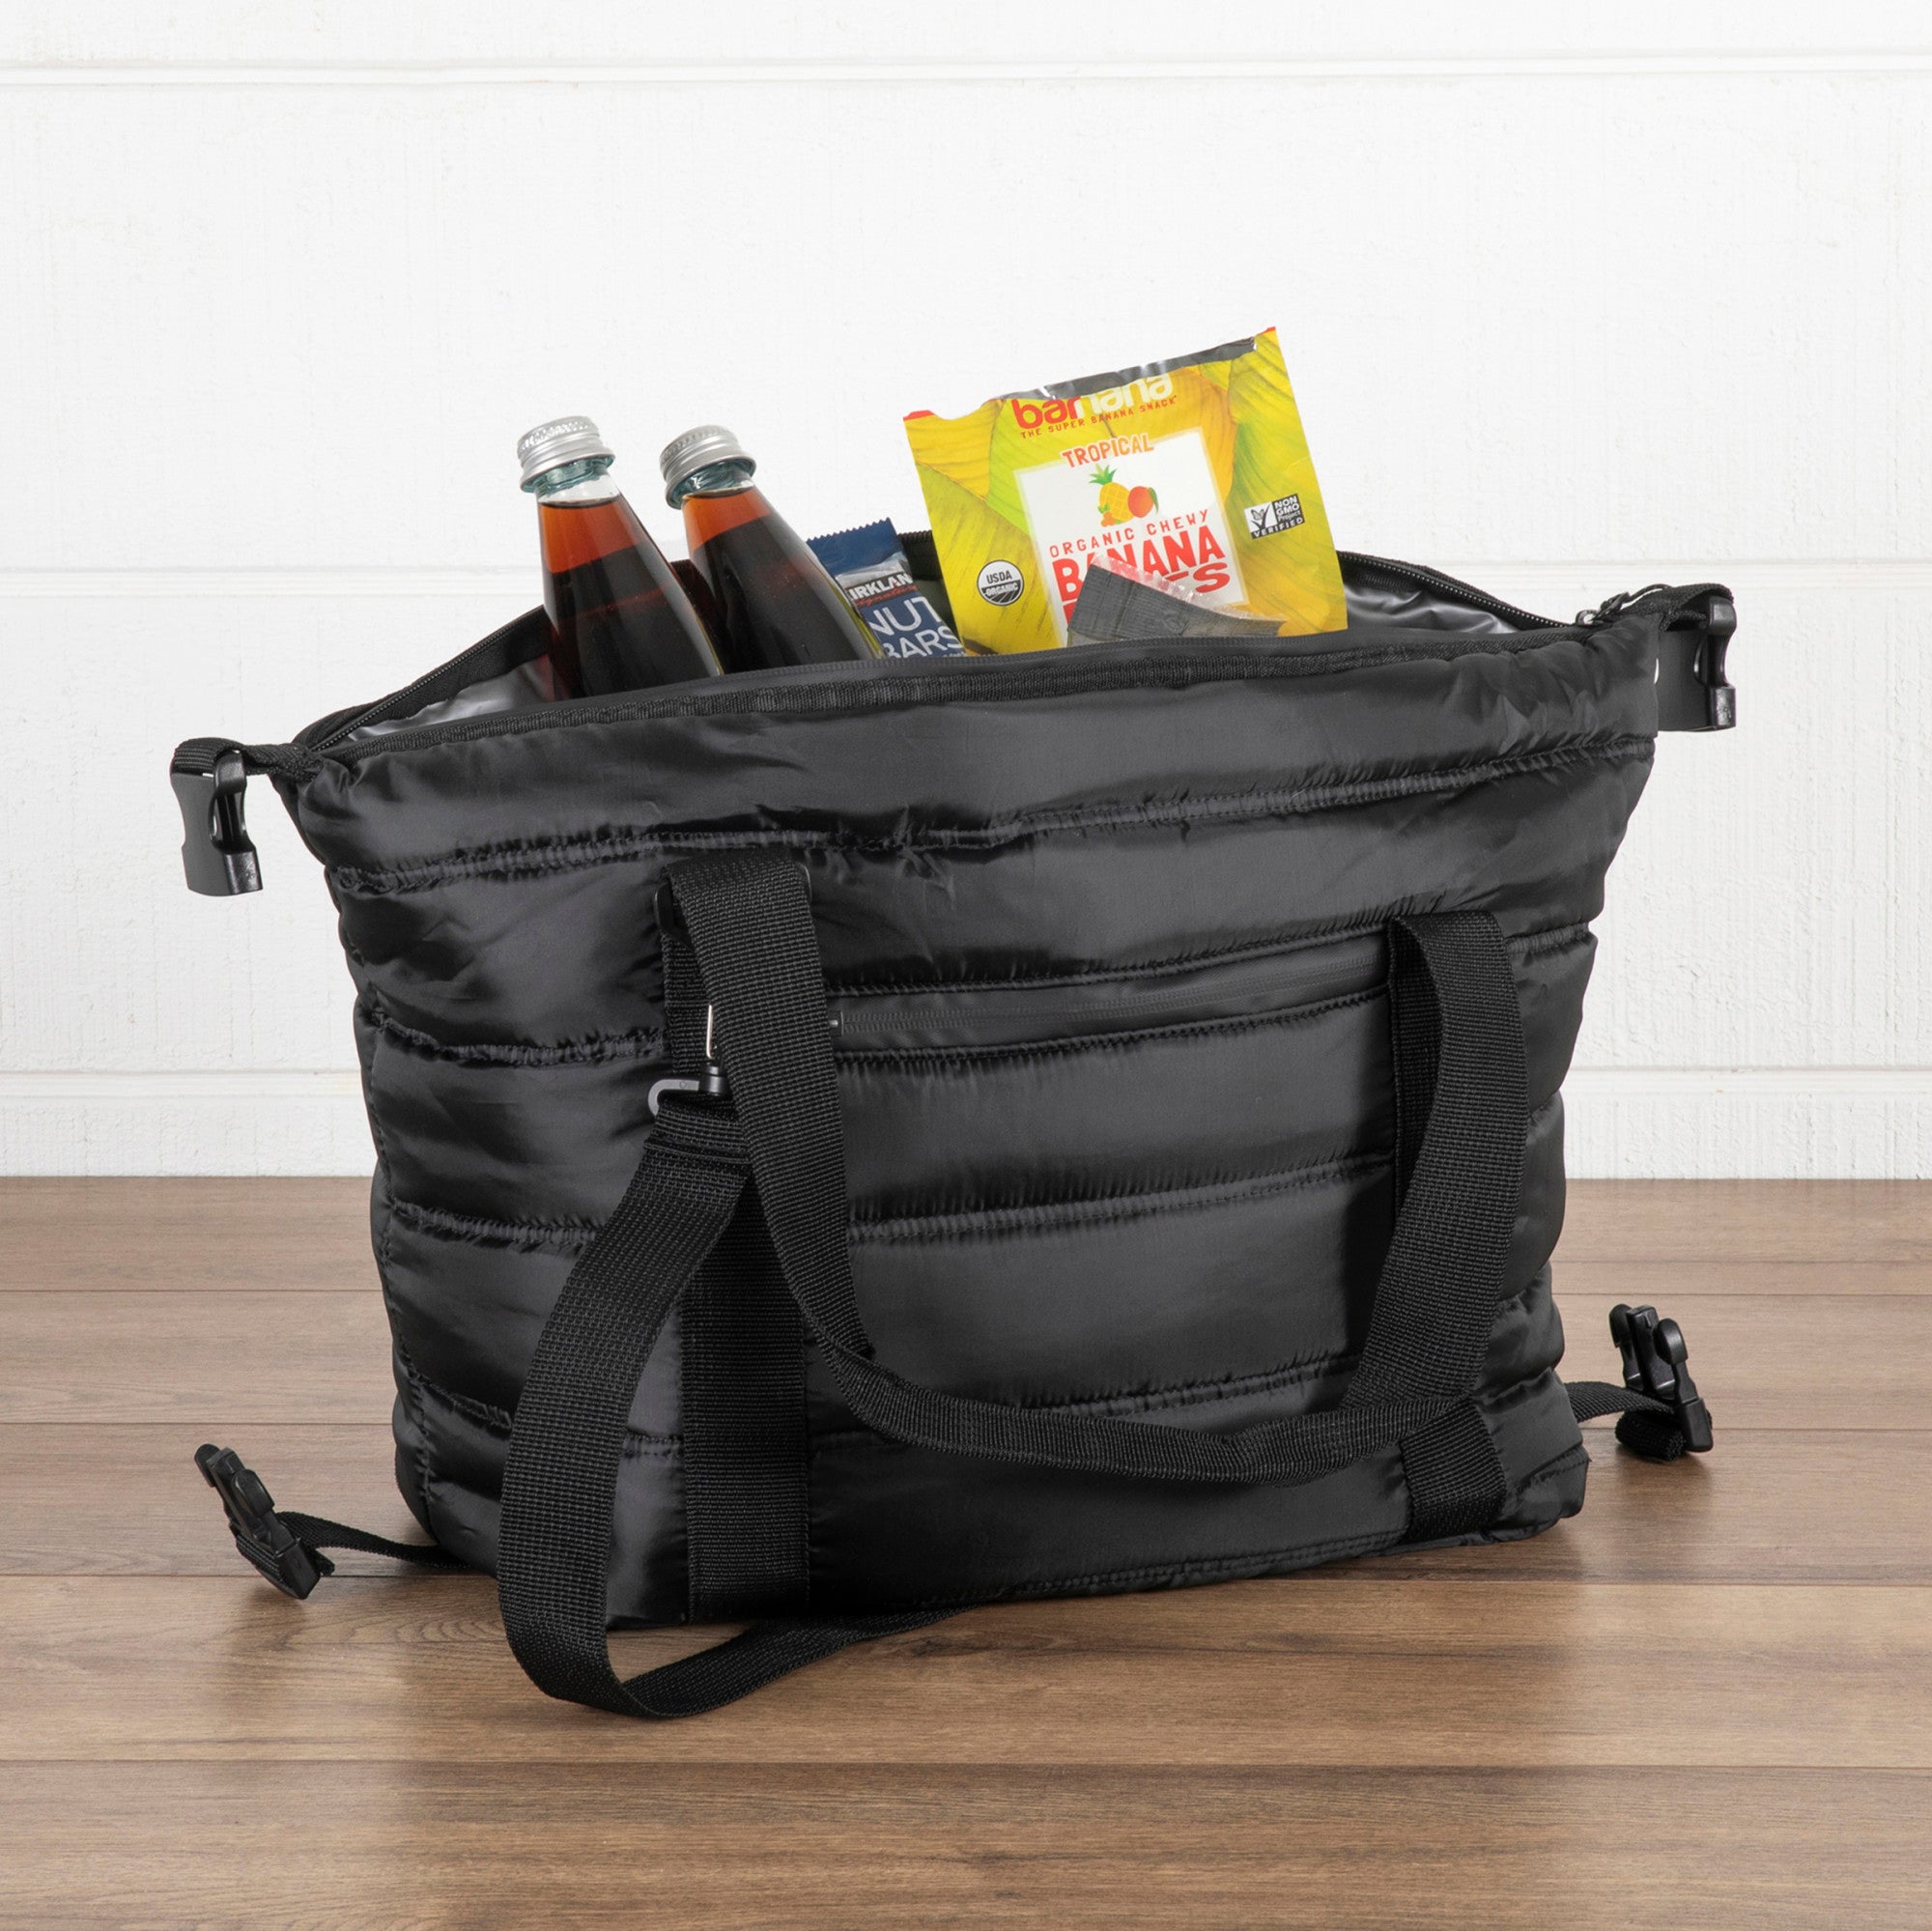 Cooler Bag insulated By Outdoorwares: Large Capacity Bag Durable, Insulated  Tote To Keep Foods And Drinks In The Right Temperature – Good for Travel,  Picnic, Beach Hiking, Camping ETC. : .in: Sports